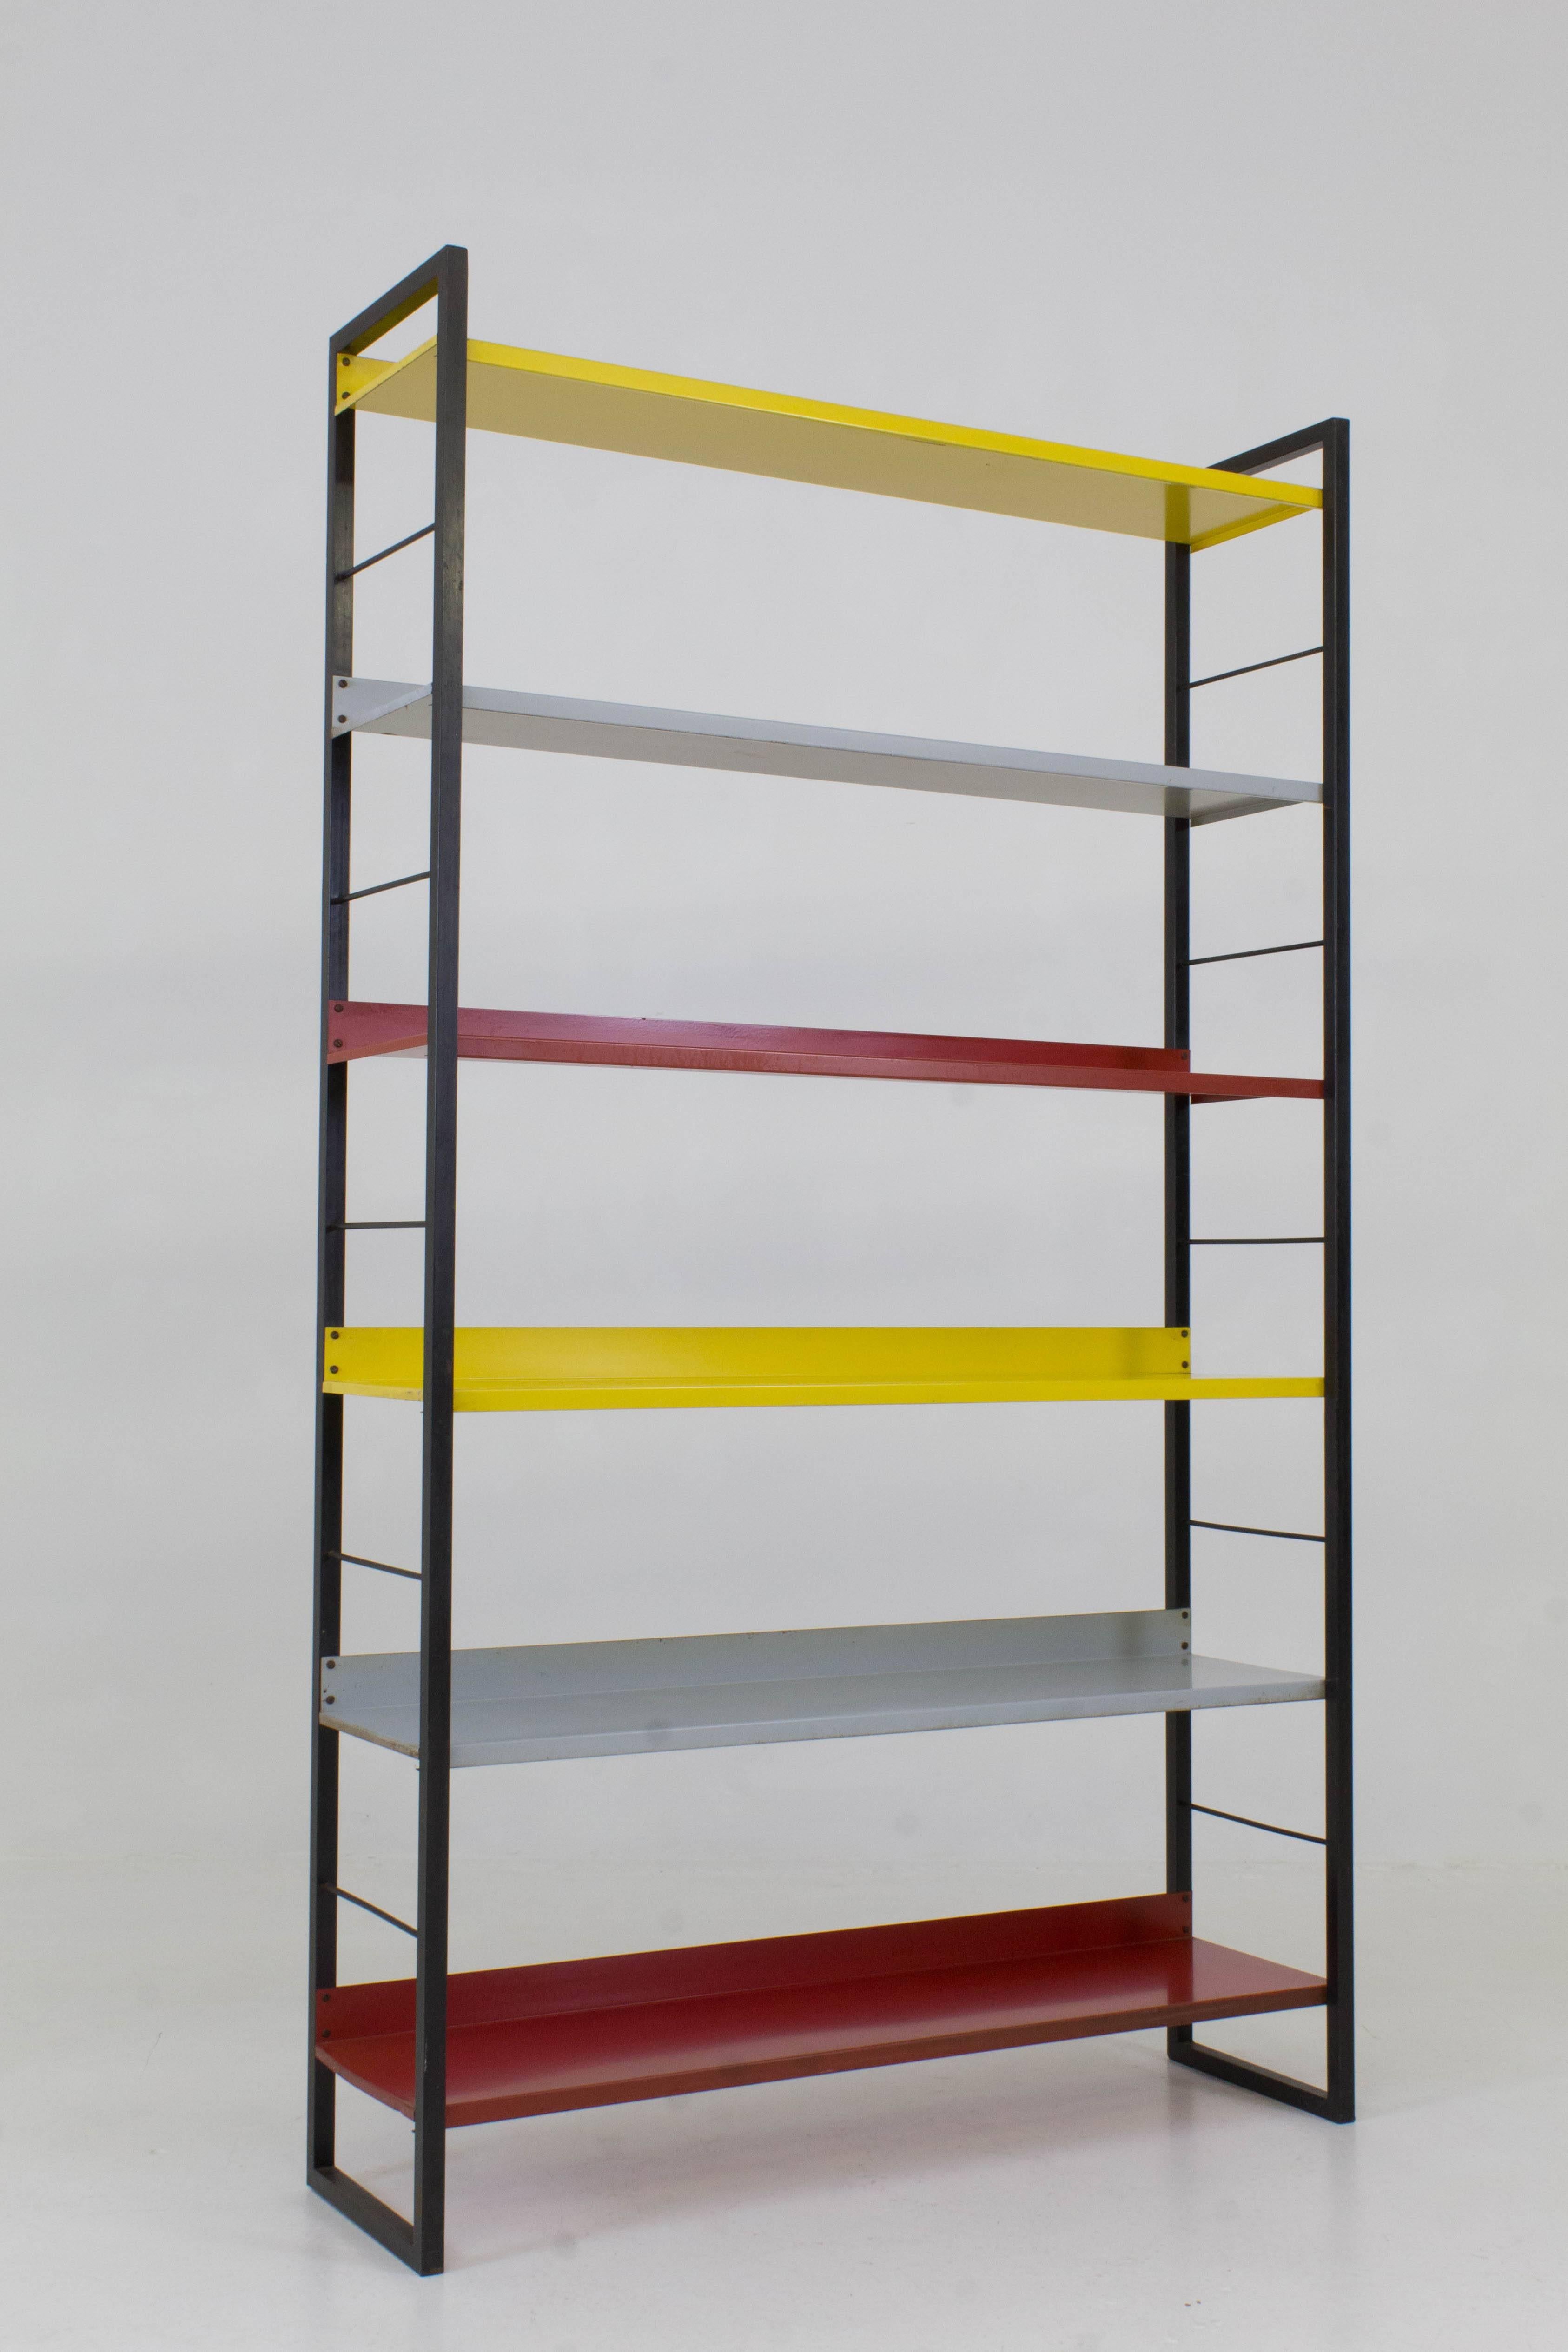 Lacquered Mid-Century Modern Multicolored Metal Standing Bookshelf by Tomado, 1950s